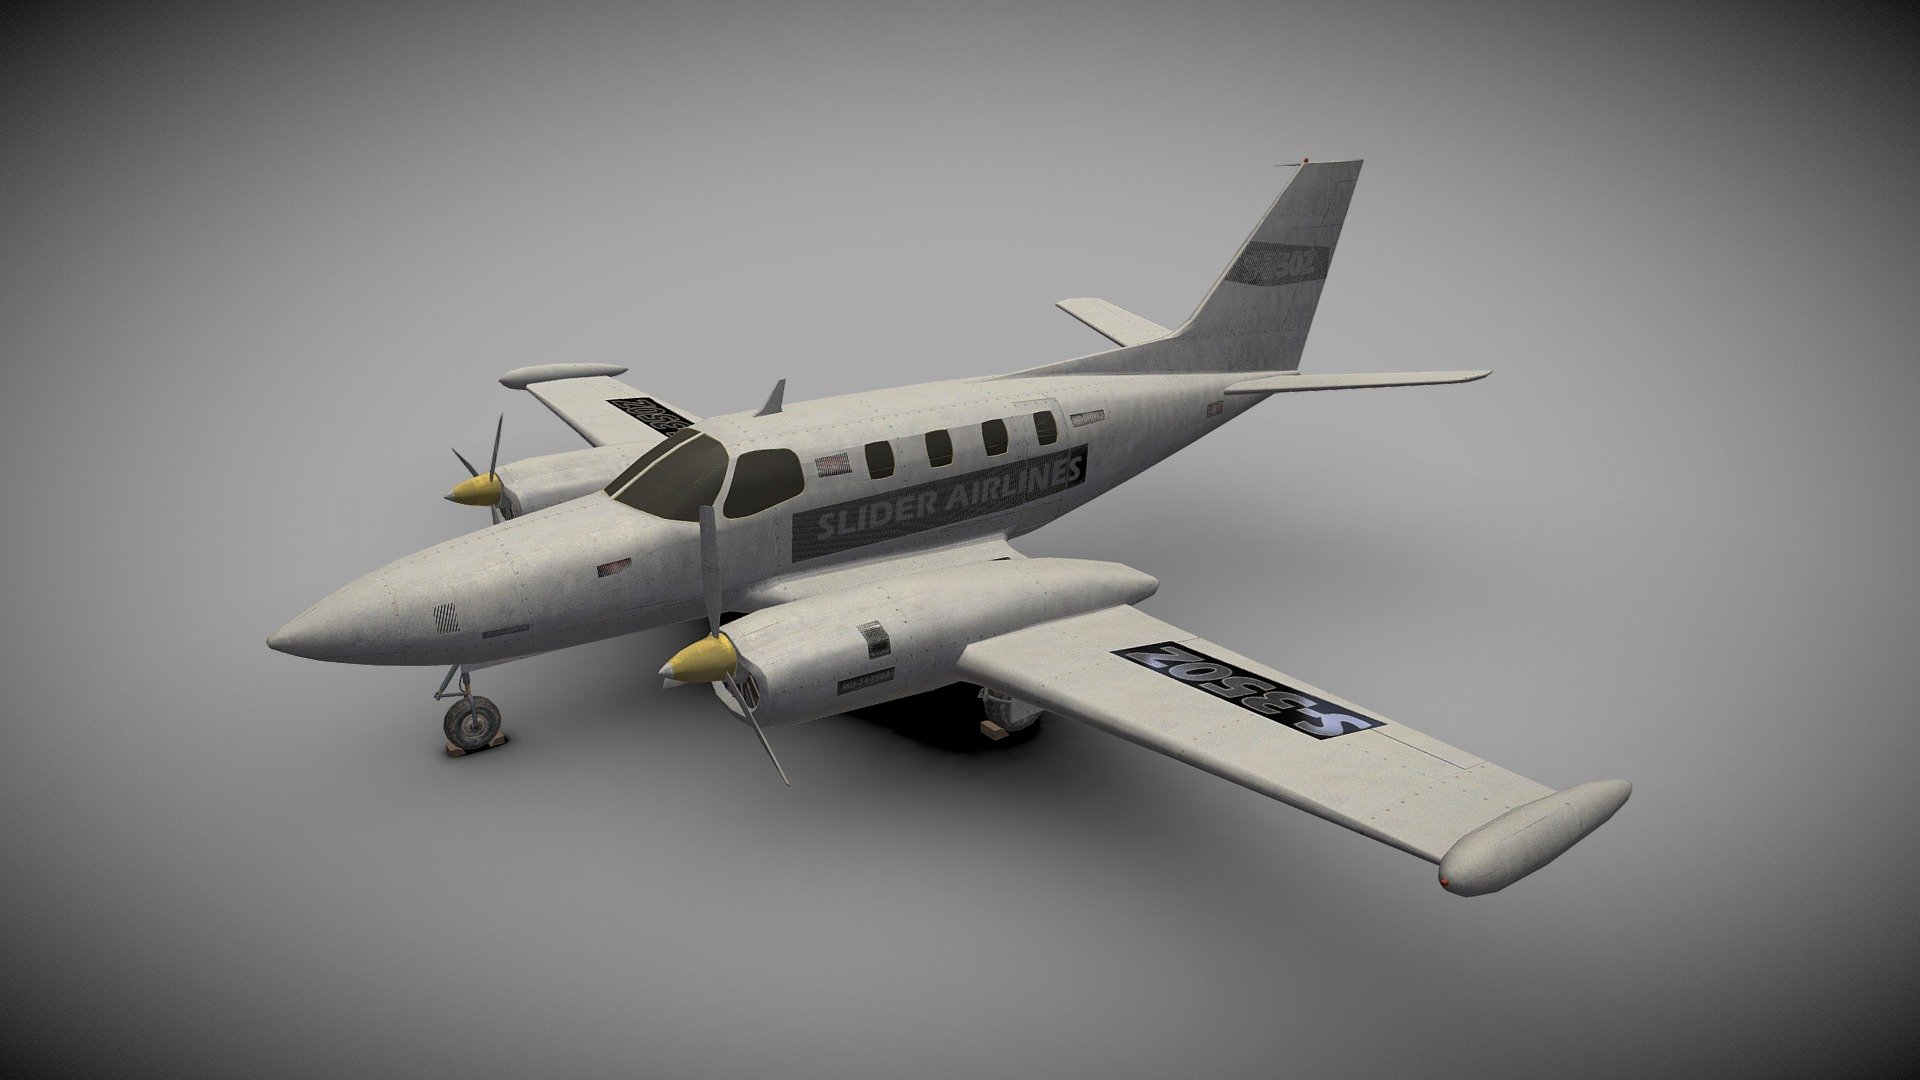 This aircraft model is a perfect addition to any flight and aviation video game, or it can be used as a prop in film, television and even real life. To start using this model in your project, simply drag and drop the model into your scene 3d model